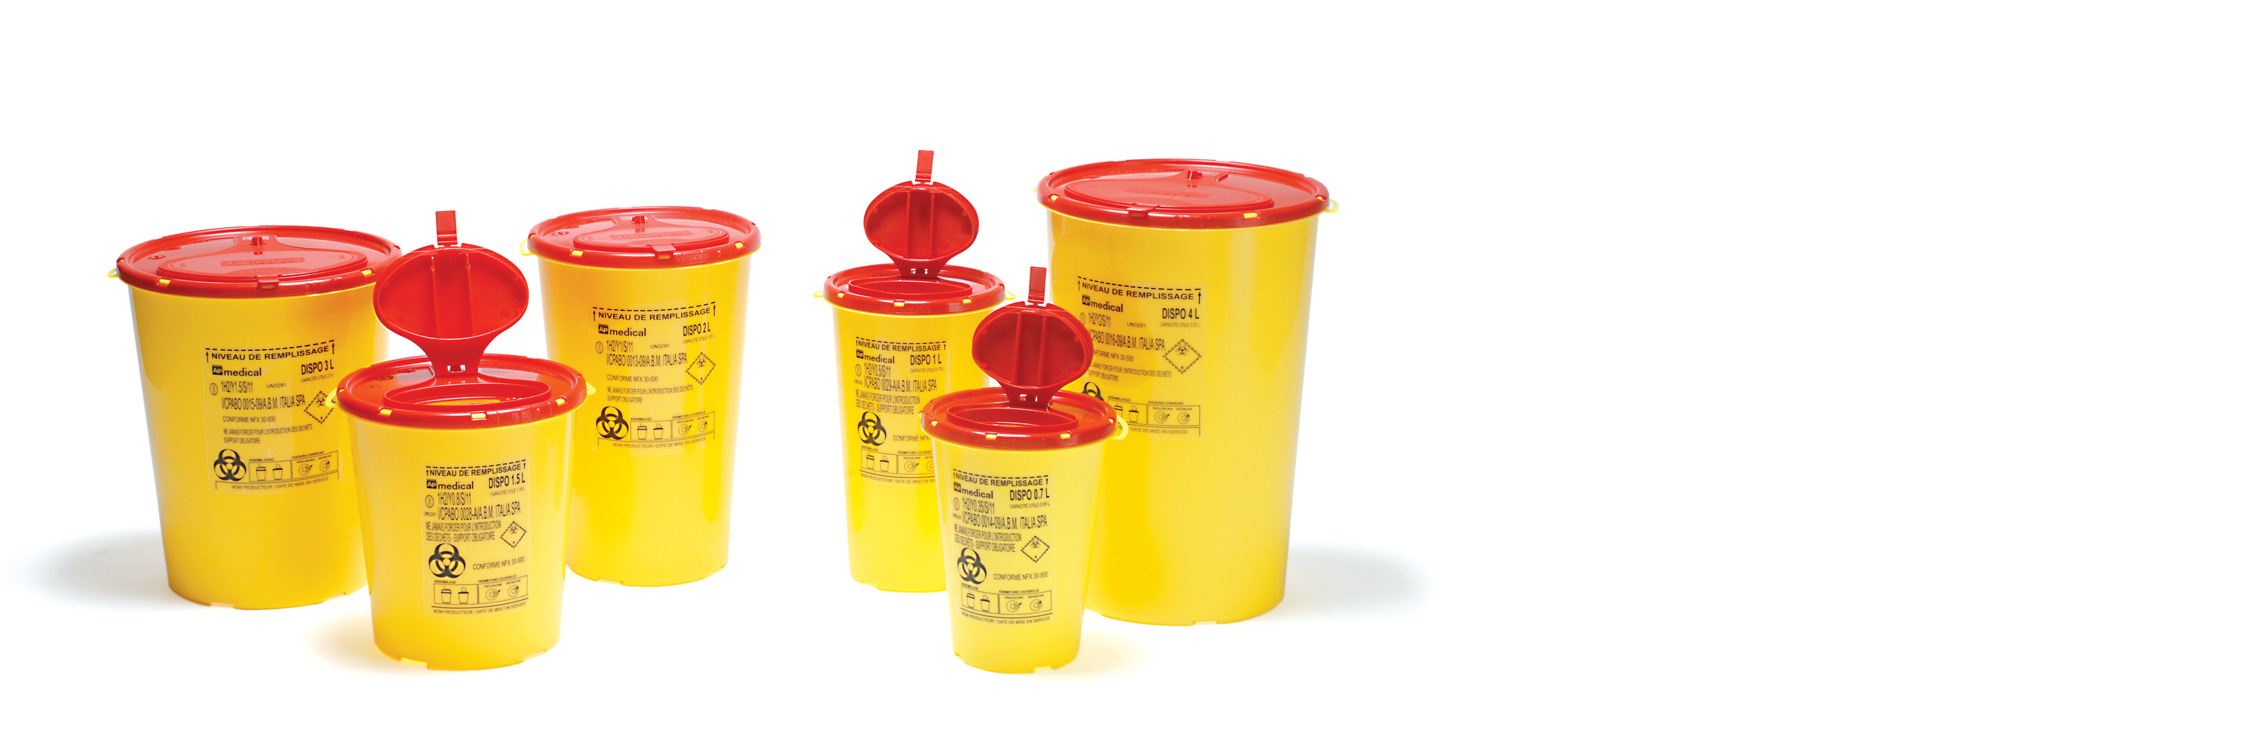 Group of disposable containers for sharp, cutting and contaminated waste